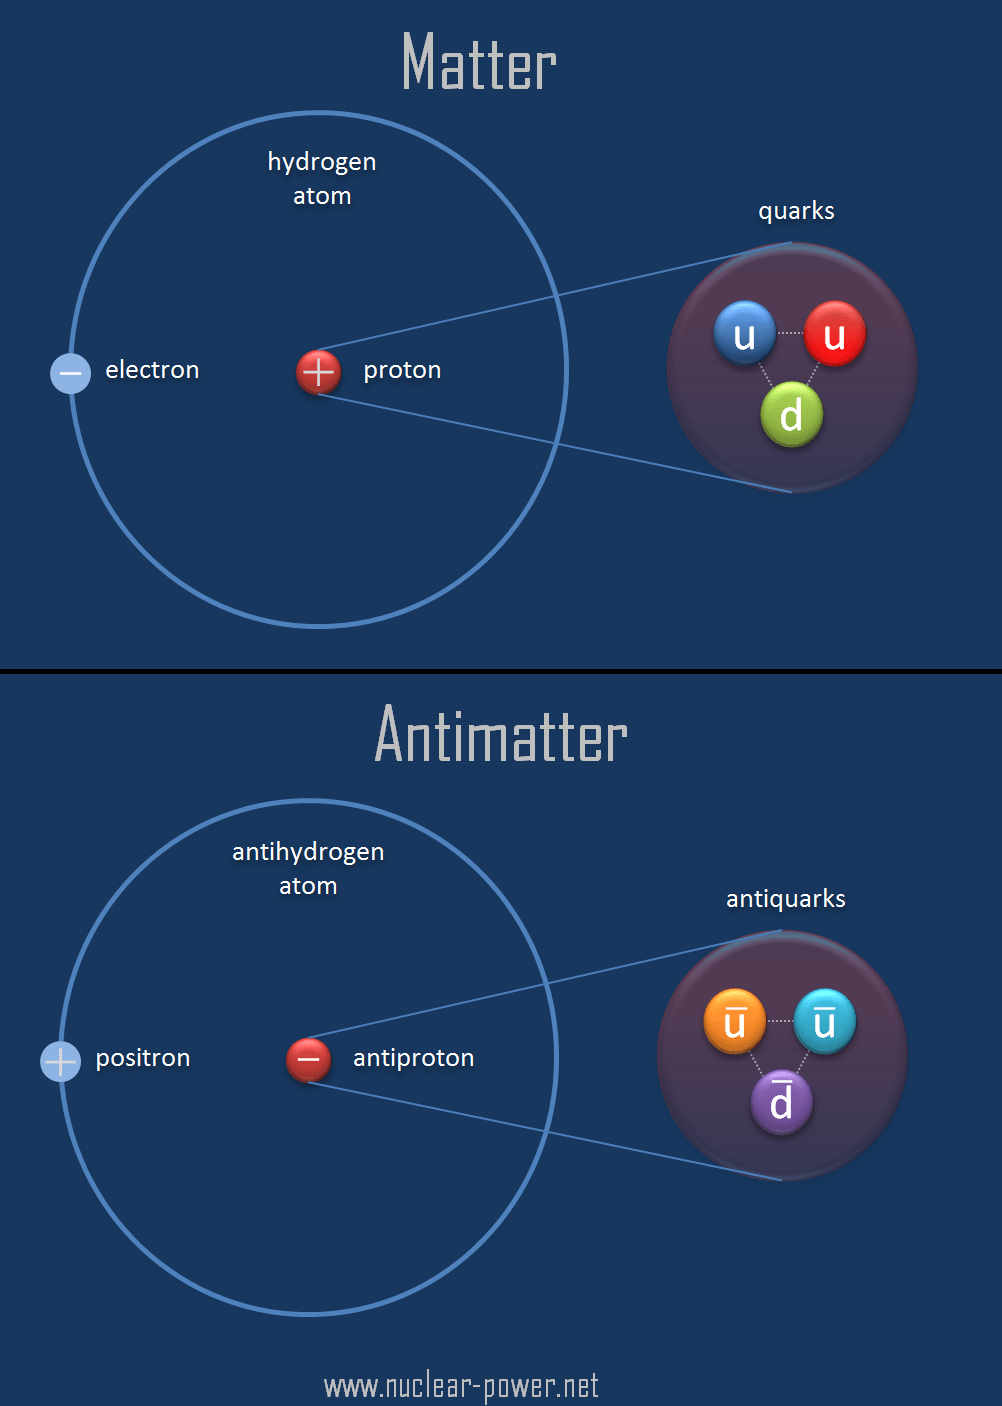 What is Antimatter | Definition & Properties | nuclear-power.com